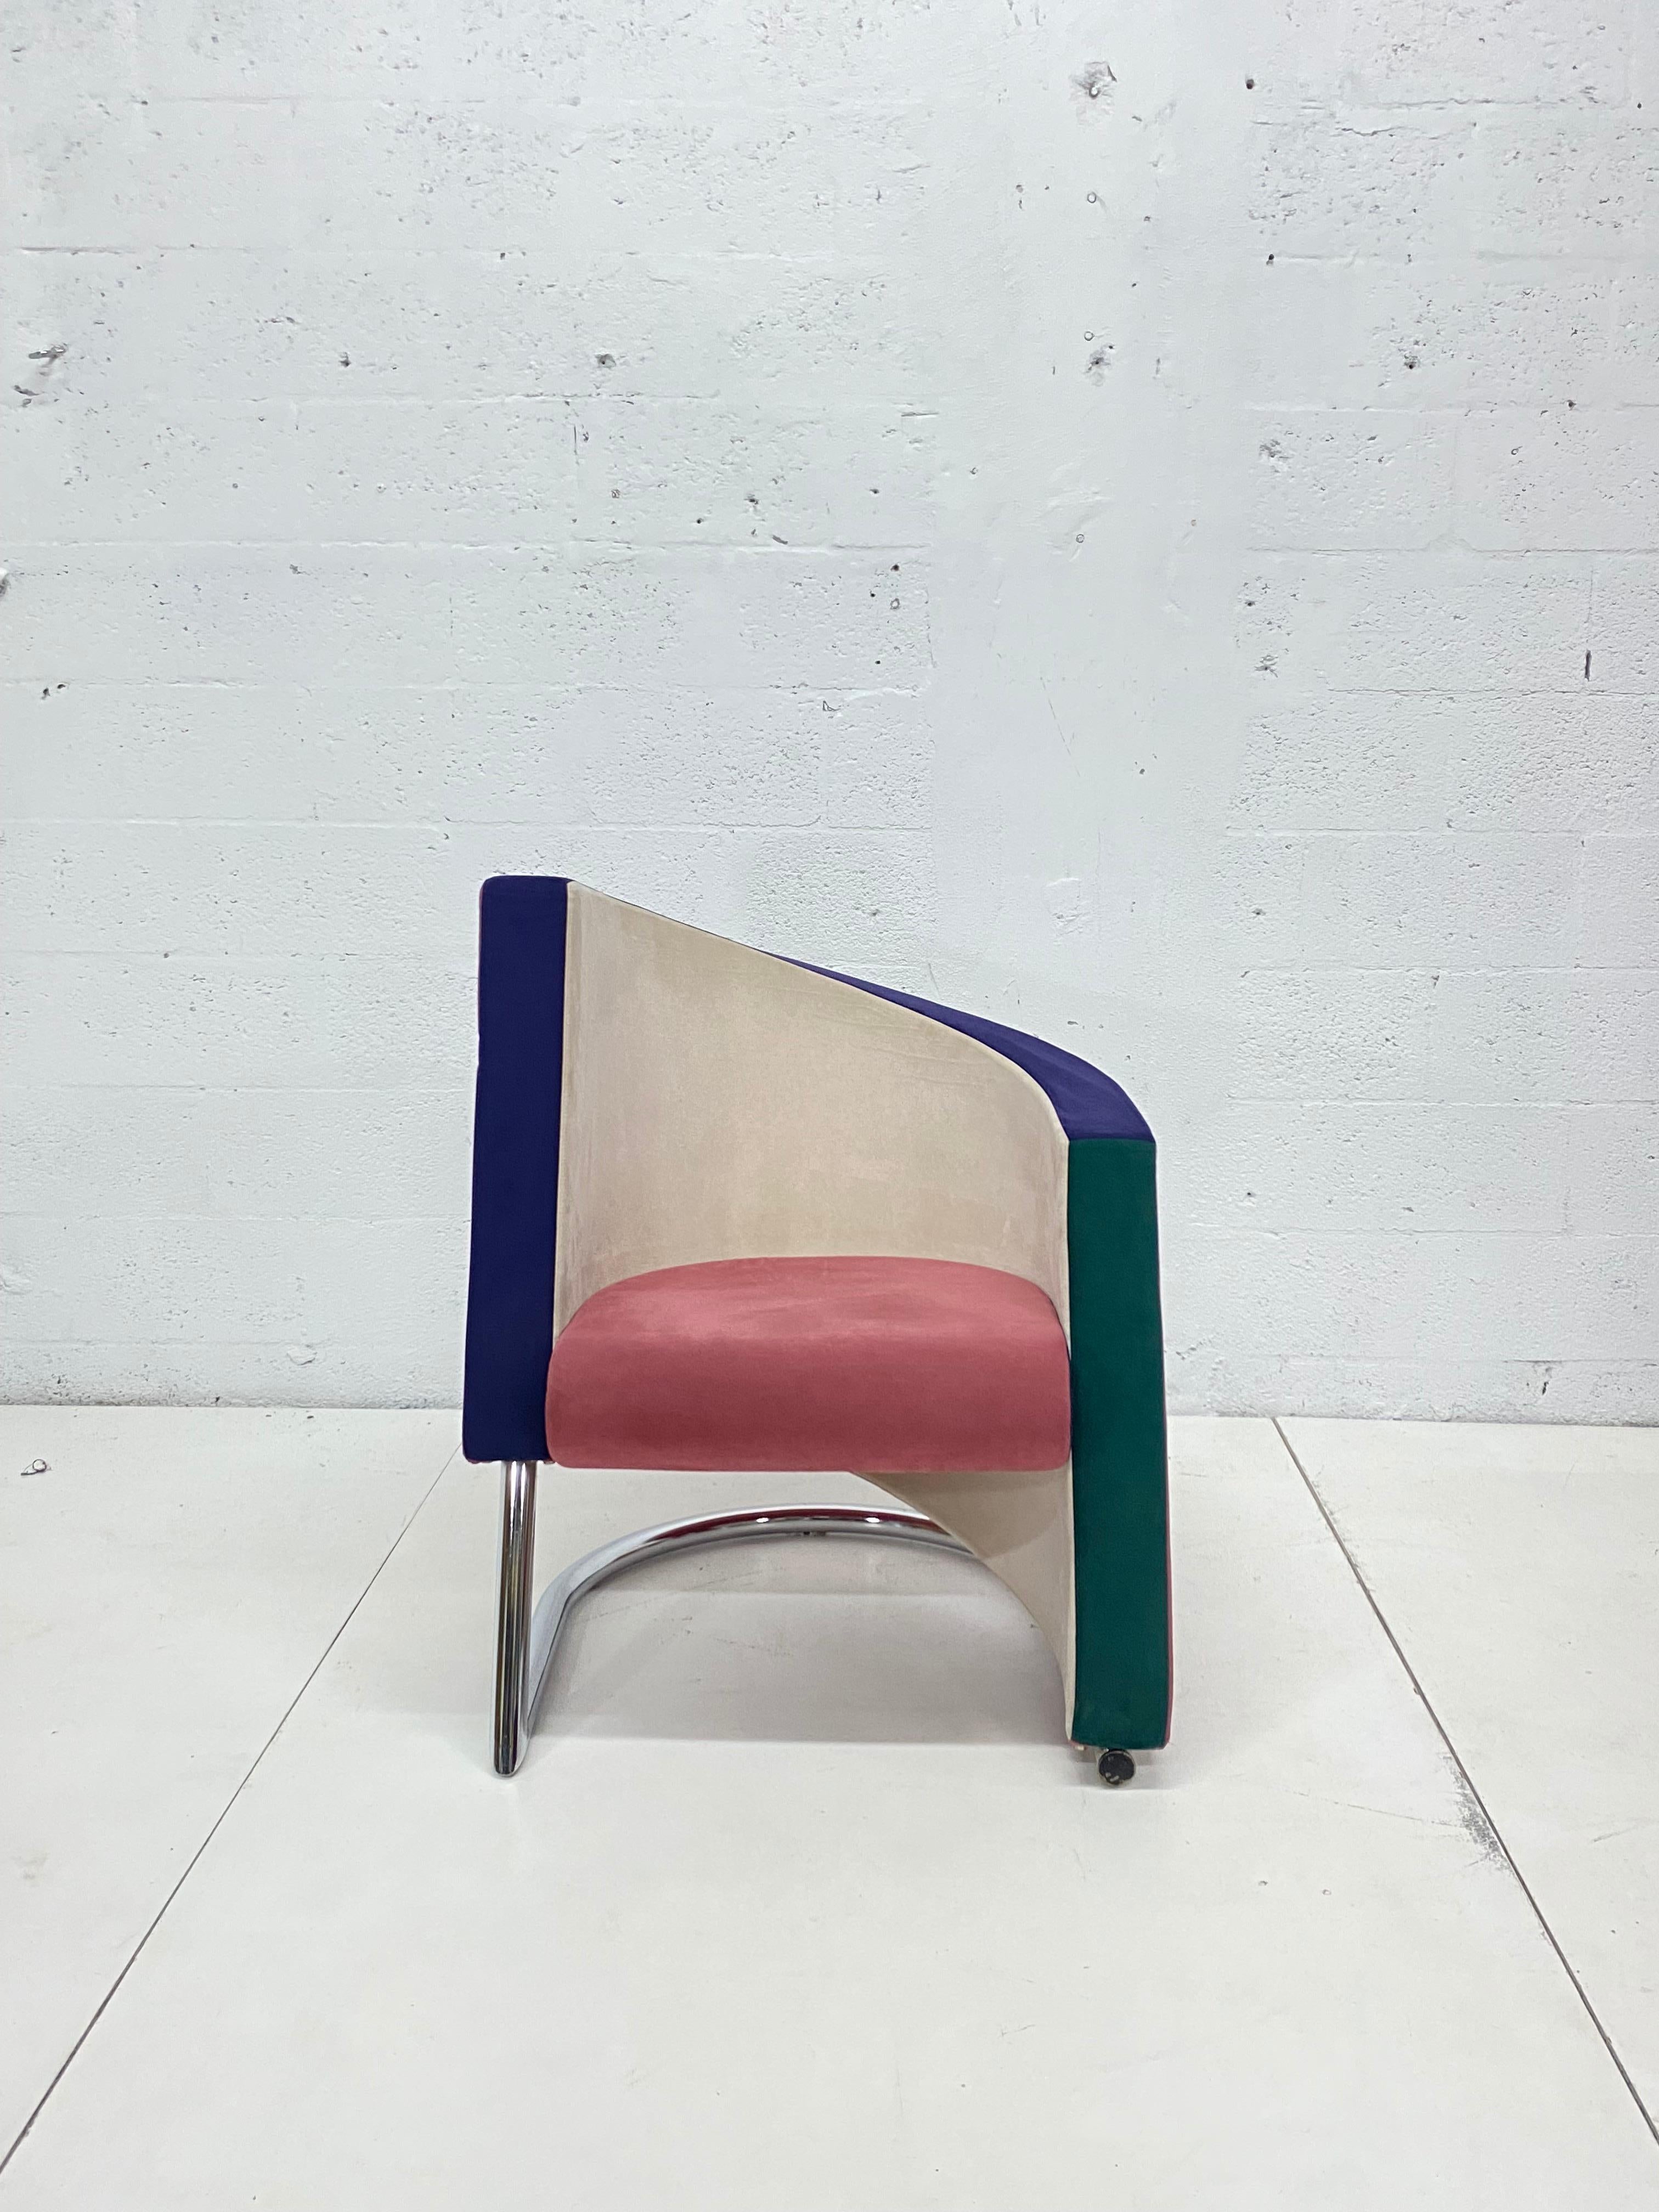 Pair of multi-color ultra-suede postmodern opposing club or lounge chairs produced by Westnofa, Chicago. Chairs are produced with foam over a steel frame and attached to a tubular chrome base. Upholstery is original and there is some puffiness on